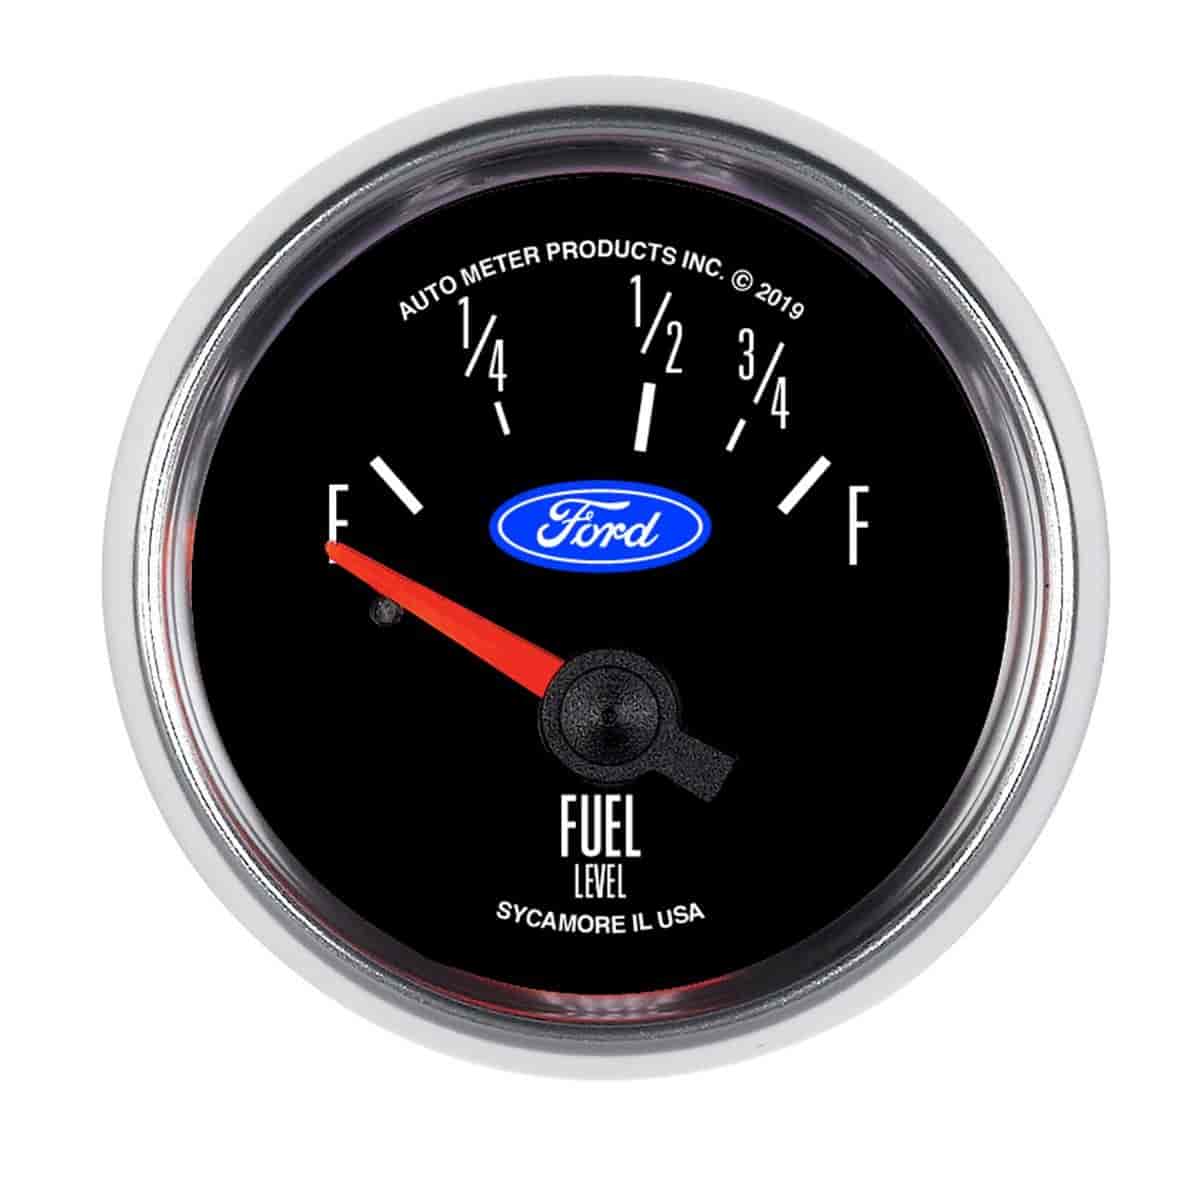 Officially-Licensed Ford Fuel Level Gauge 2 1/16 in., 73-10 Ohms, Electrical (Short Sweep)